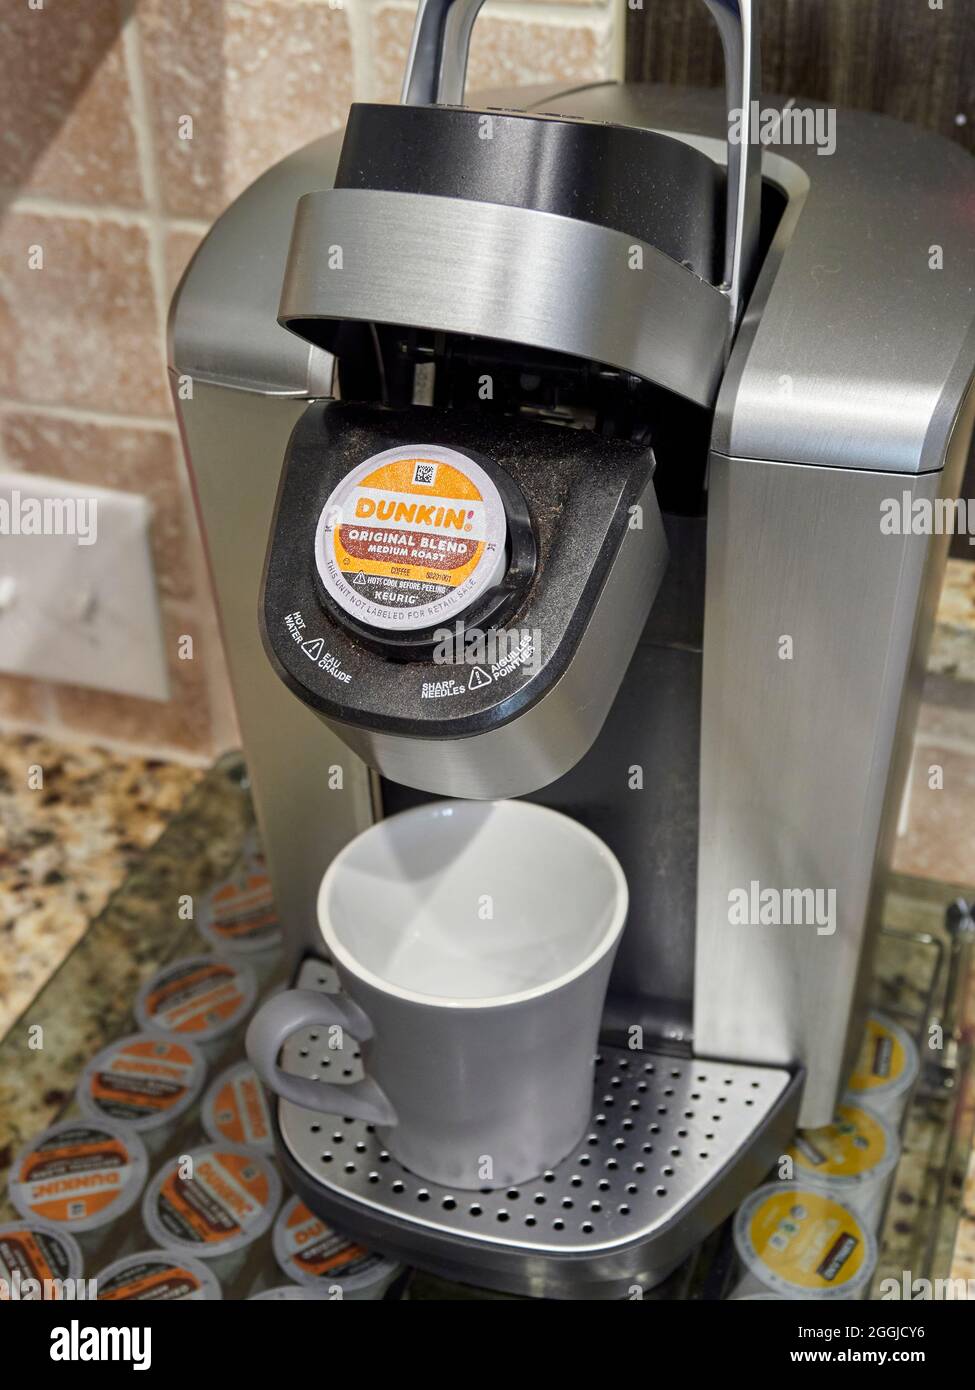 Dunkin Donuts K-cup single cup coffee in a Keurig coffee maker on a kitchen  counter Stock Photo - Alamy